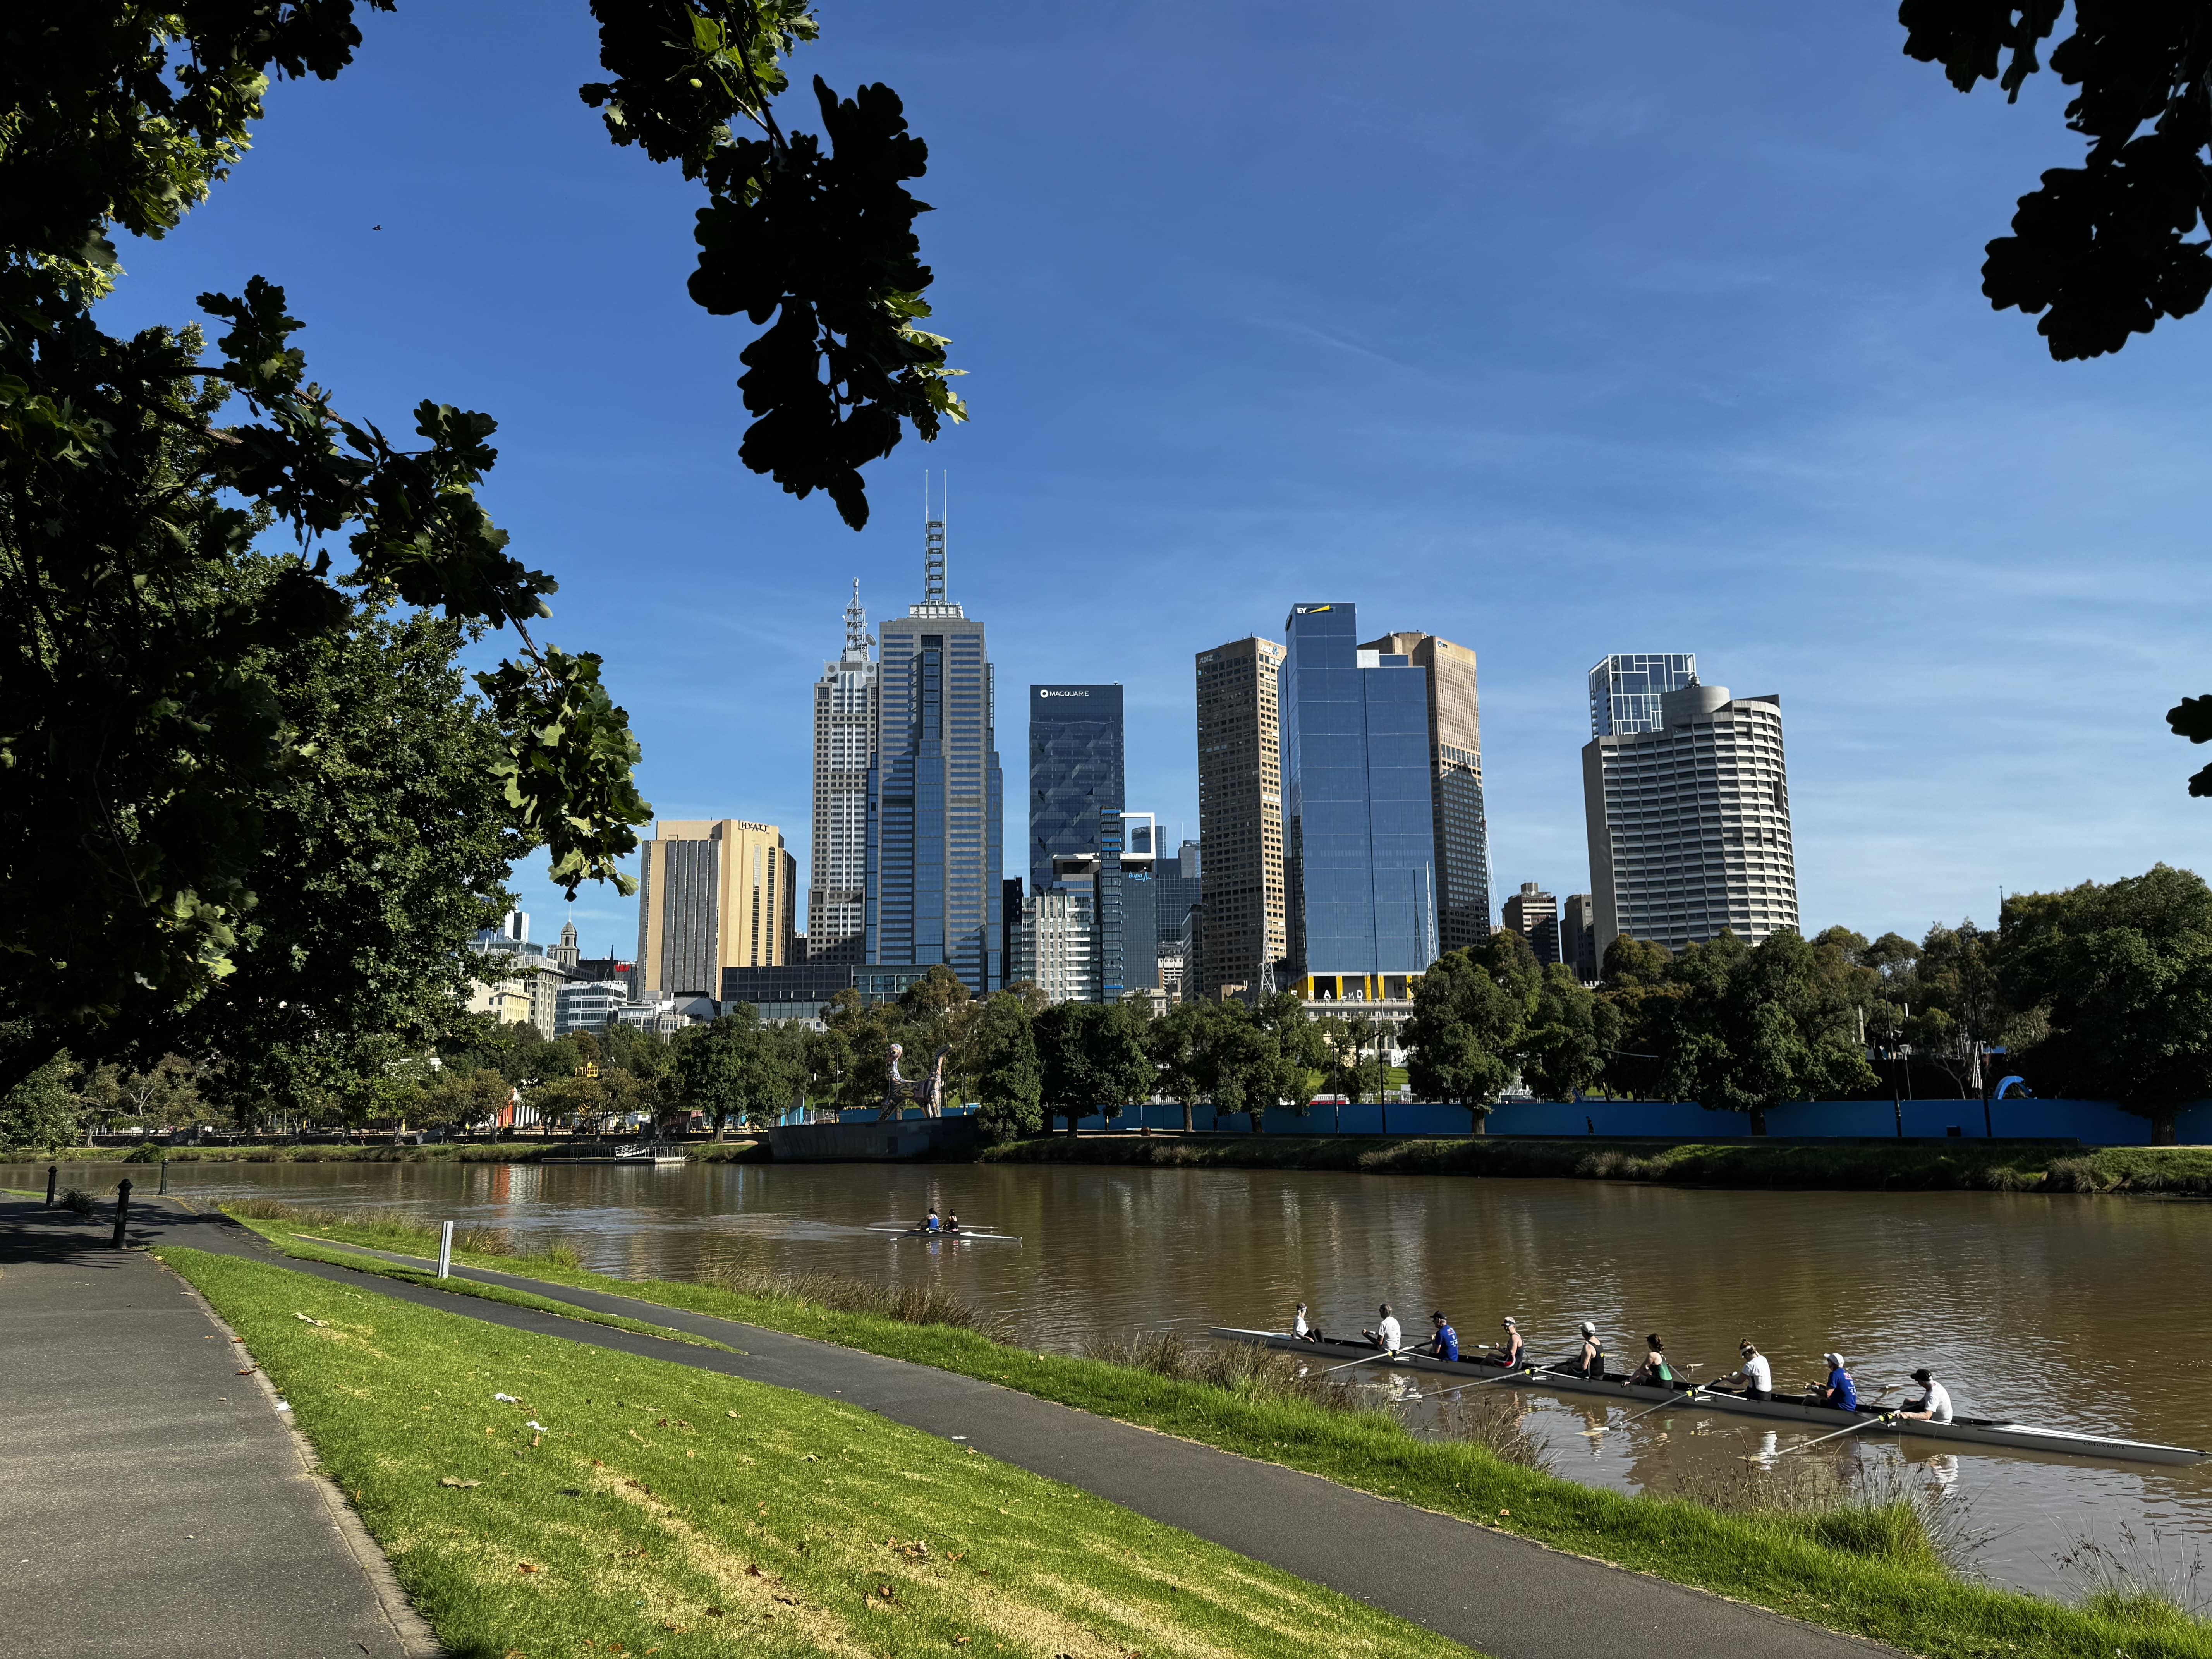 A photo of Melbourne and its skyline.